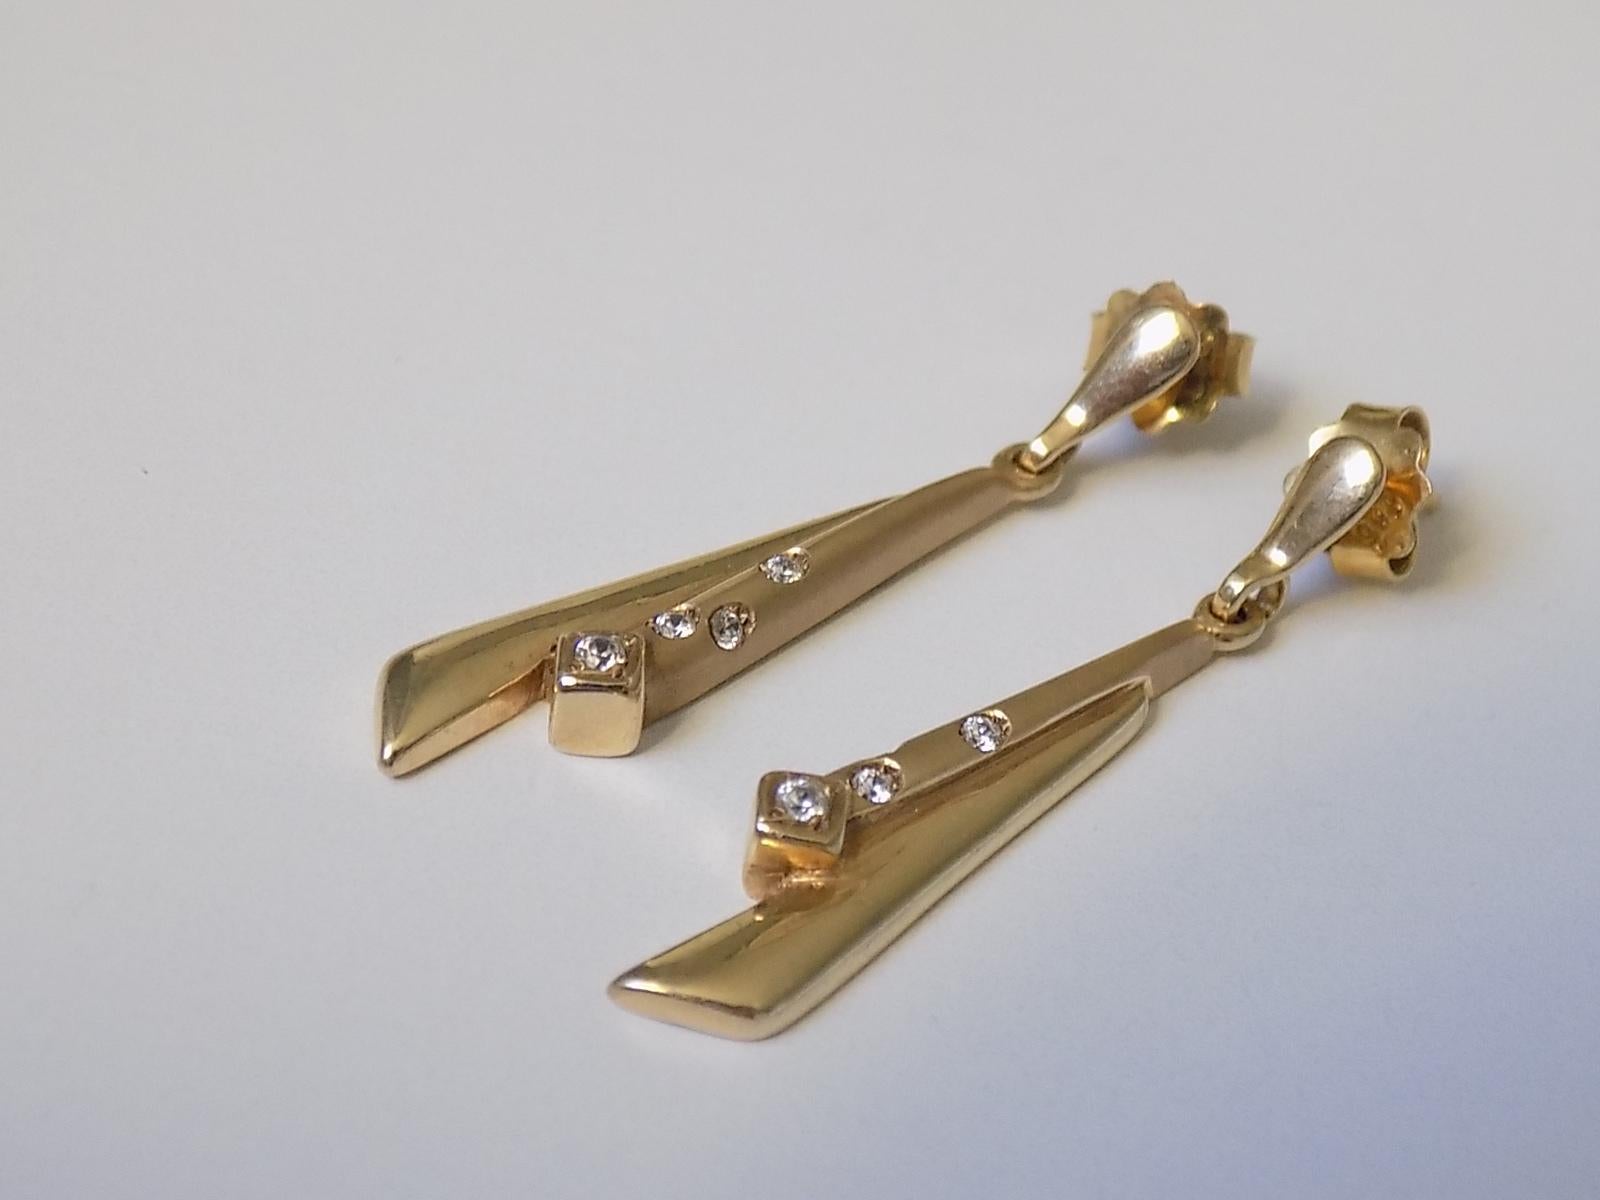 A Lovely Vintage 14 Carat Gold and CZ drop earrings for pierced ears. The earrings made in Art Deco style.
Drop 37mm, Width 7mm.
Weight 4.4gr.
Marked 585 for 14 Carat Gold.
The earrings in excellent condition for the age and ready to wear.